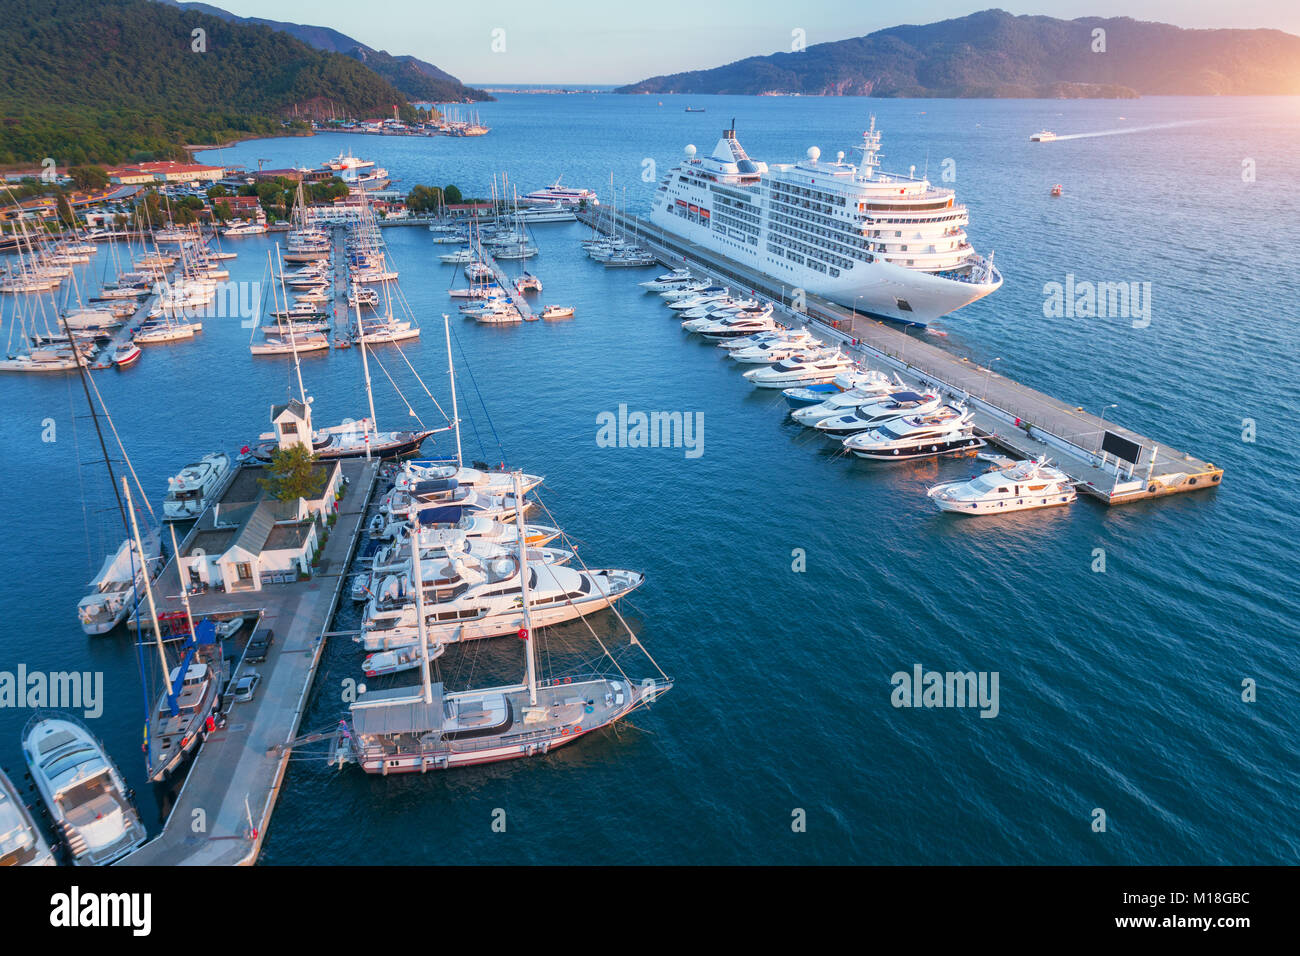 Cruise ship at harbor. Aerial view of beautiful large white ship at sunset. Colorful landscape with boats in marina bay, sea, colorful sky. Top view f Stock Photo